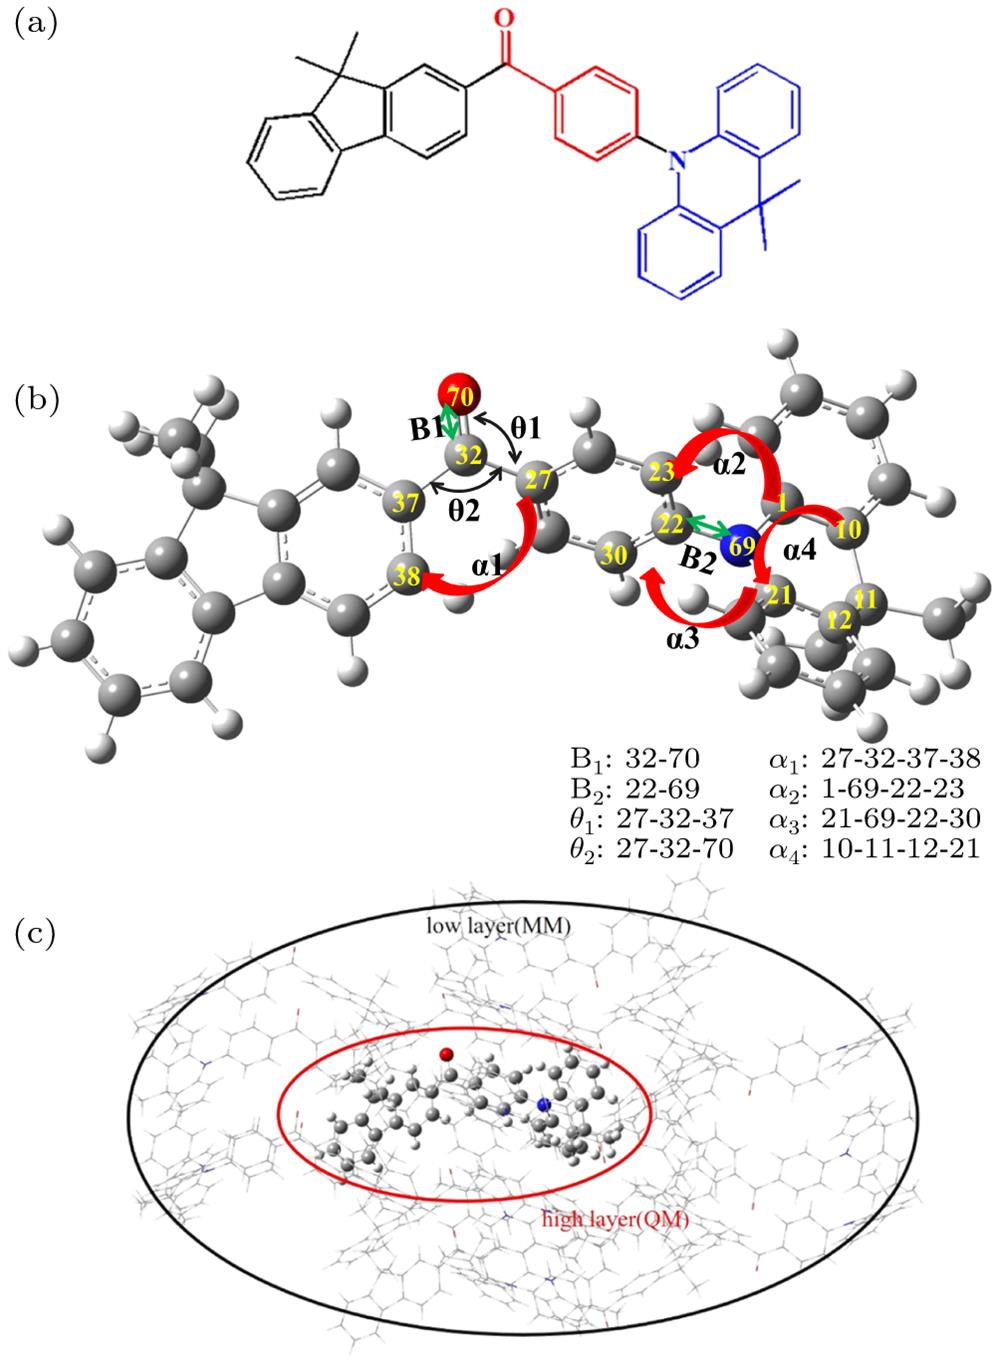 (a) Chemical structure of DMF-BP-DMAC. (b) The atomic labels and the interesting bond lengths (B1, B2), bond angles (θ1, θ2), and dihedral angles (α1, α2, α3, and α4). (c) ONIOM model: surrounding molecules are regarded as low layer and the centered DMF-BP-DMAC is treated as high layer.